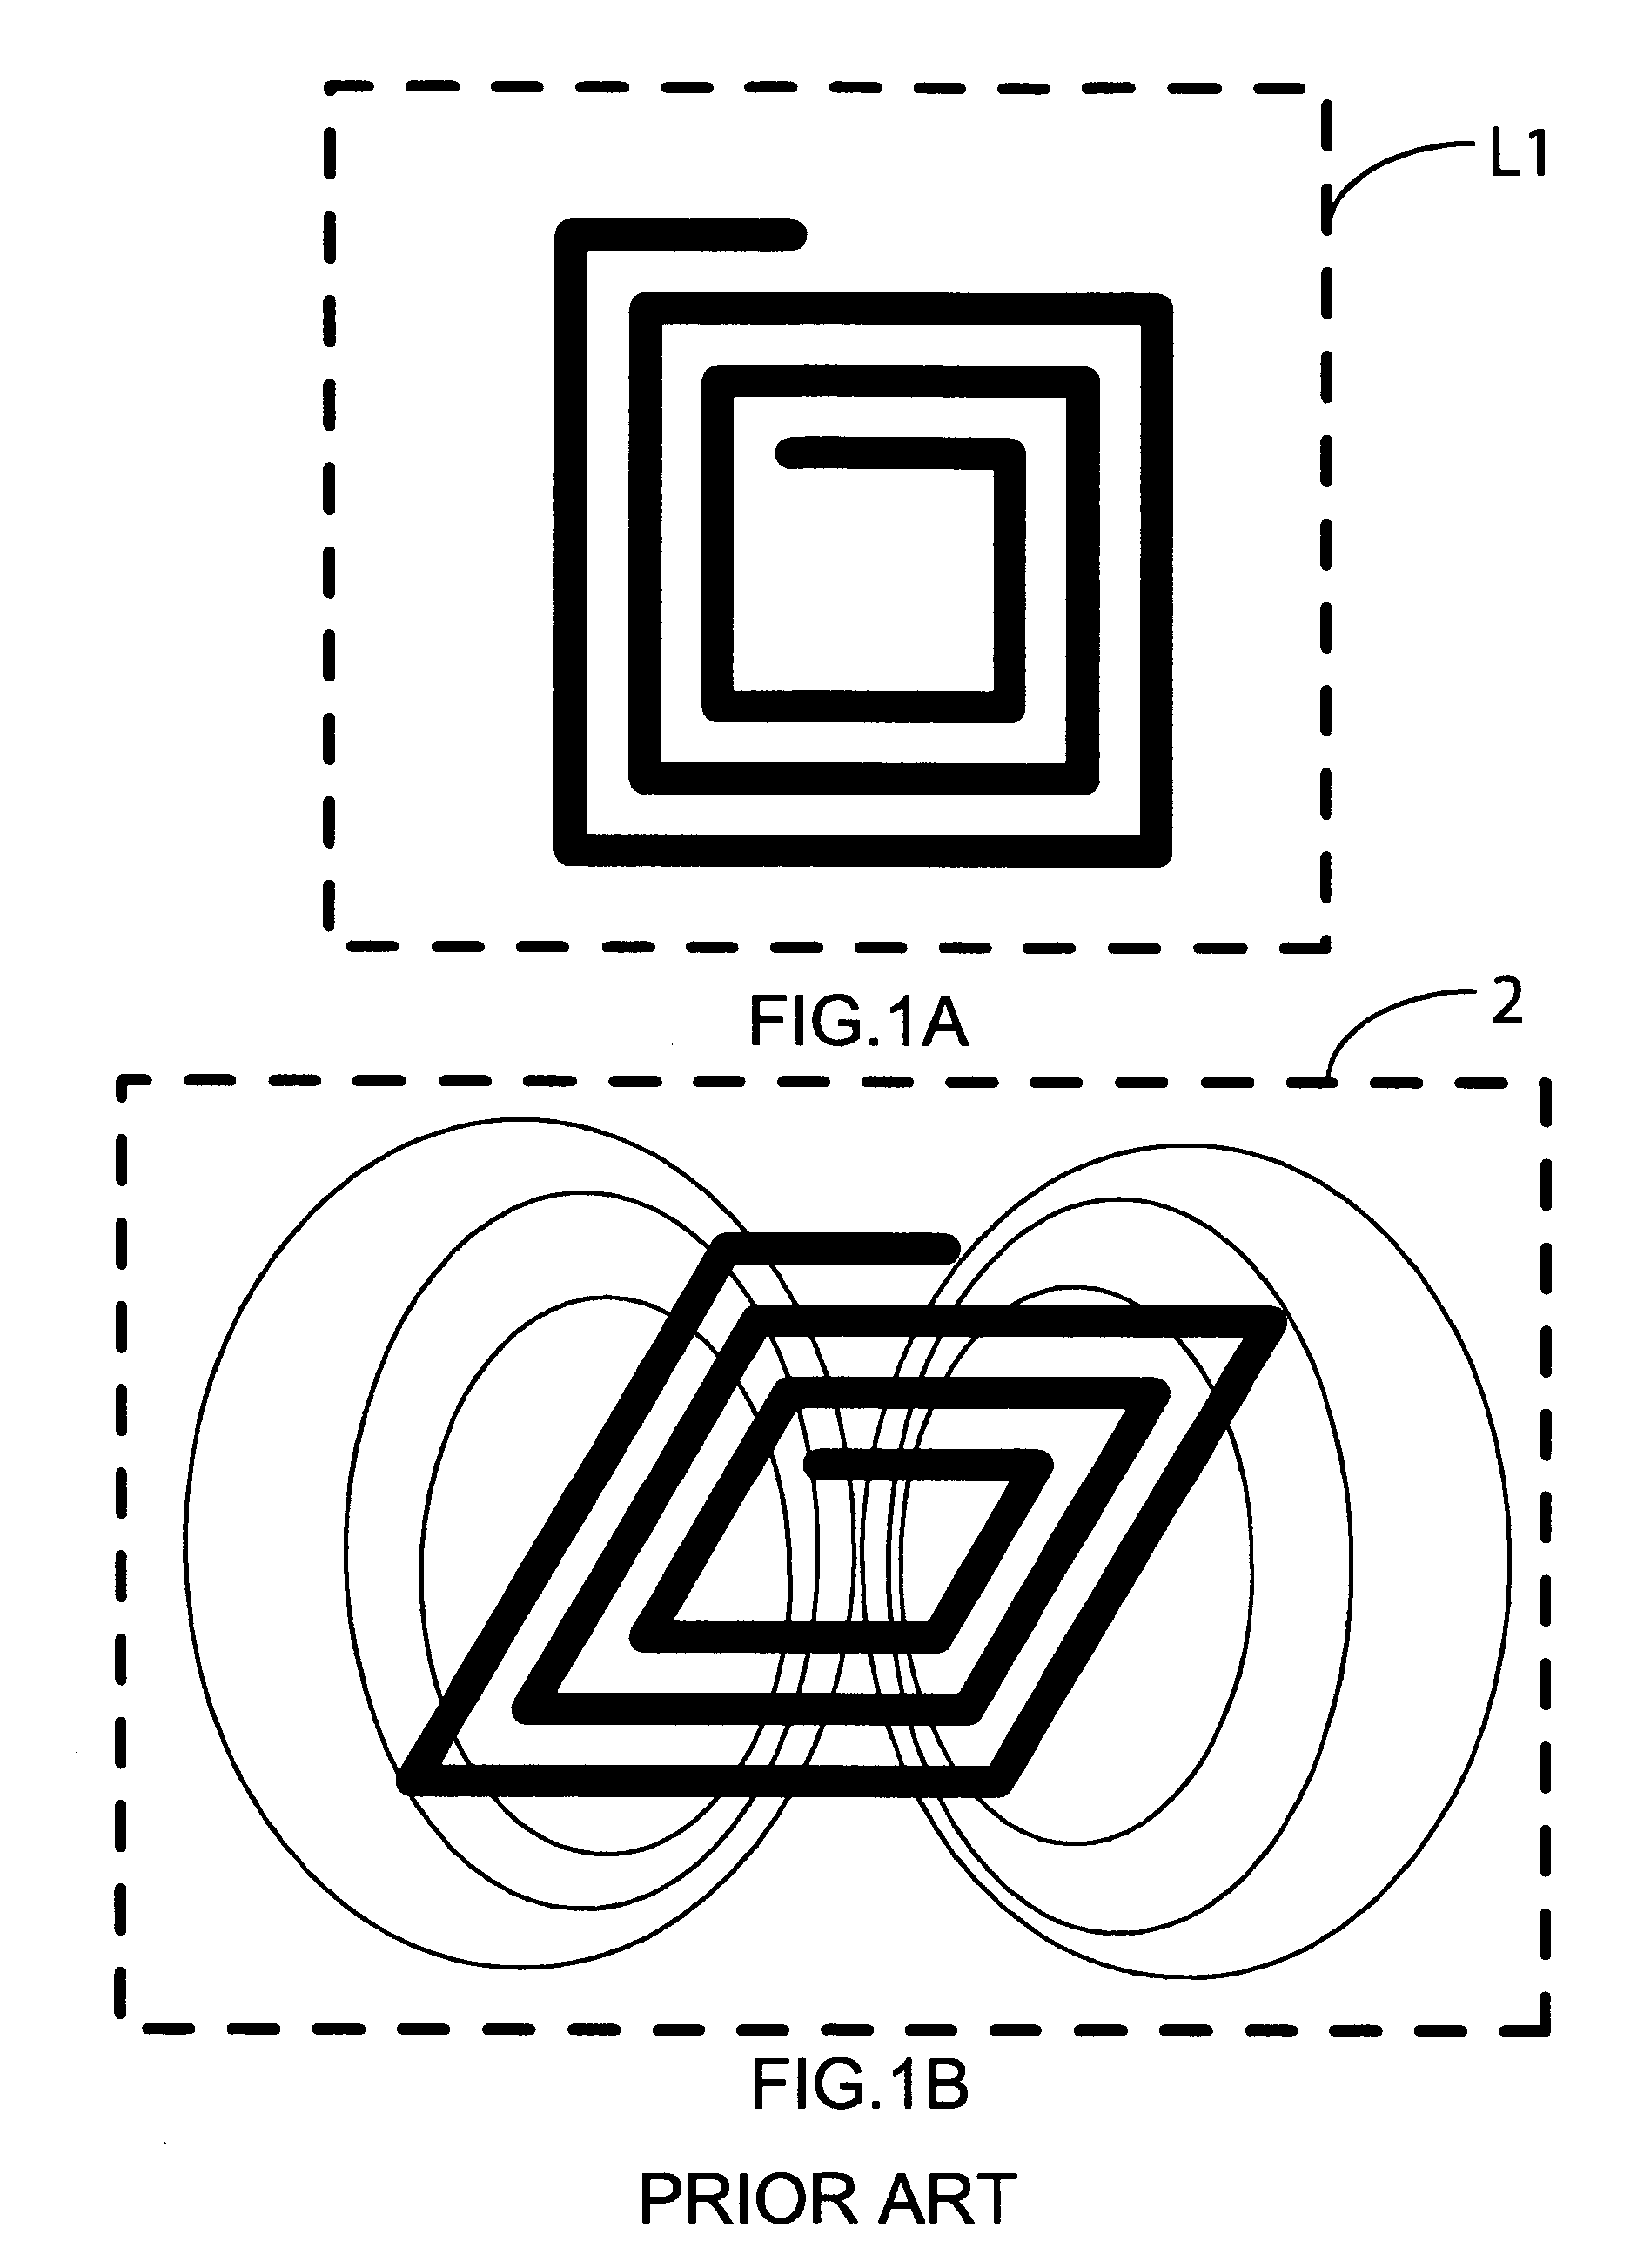 Air core inductive element on printed circuit board for use in switching power conversion circuitries